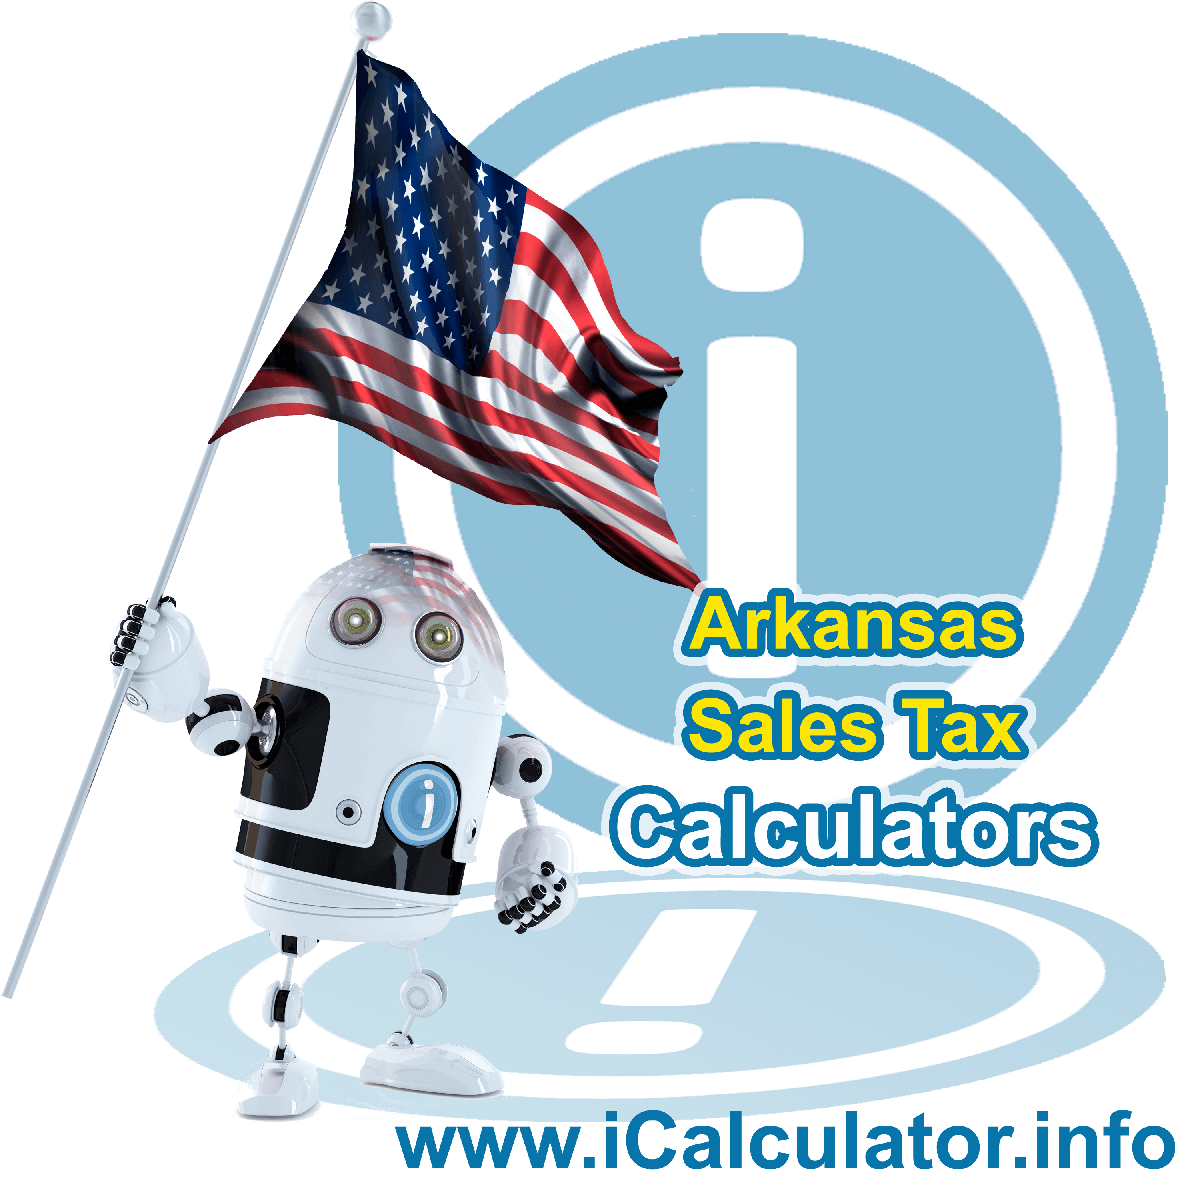 Izard County Sales Rates: This image illustrates a calculator robot calculating Izard County sales tax manually using the Izard County Sales Tax Formula. You can use this information to calculate Izard County Sales Tax manually or use the Izard County Sales Tax Calculator to calculate sales tax online.